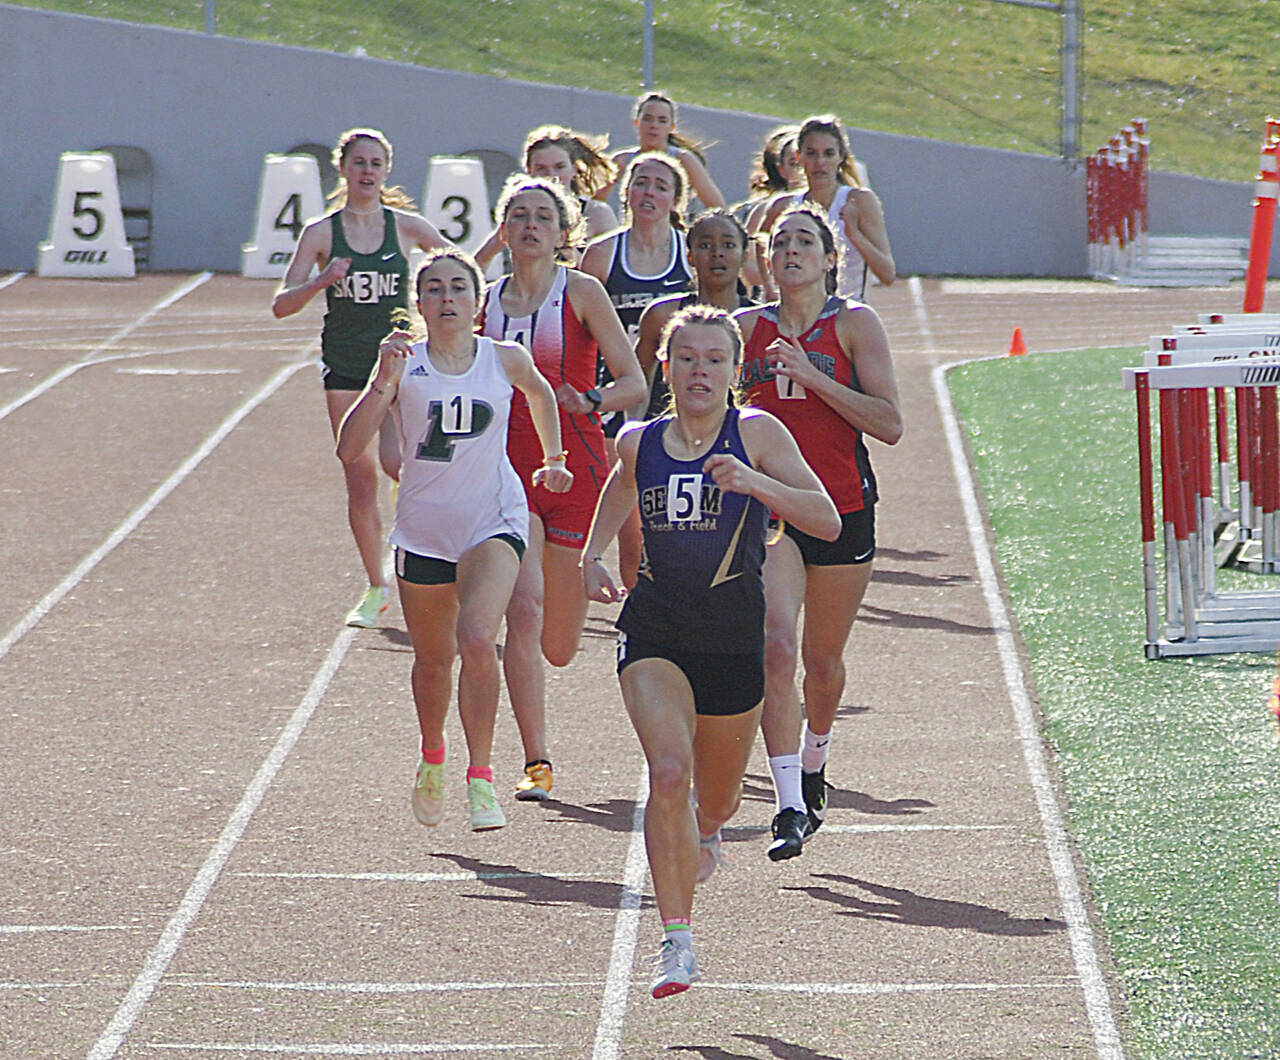 Sequim’s Riley Pyeatt races to a win in the 800 meter race at the at the Gear Up Eason Invitational on April 23. Photo by Joanne Huemoeller